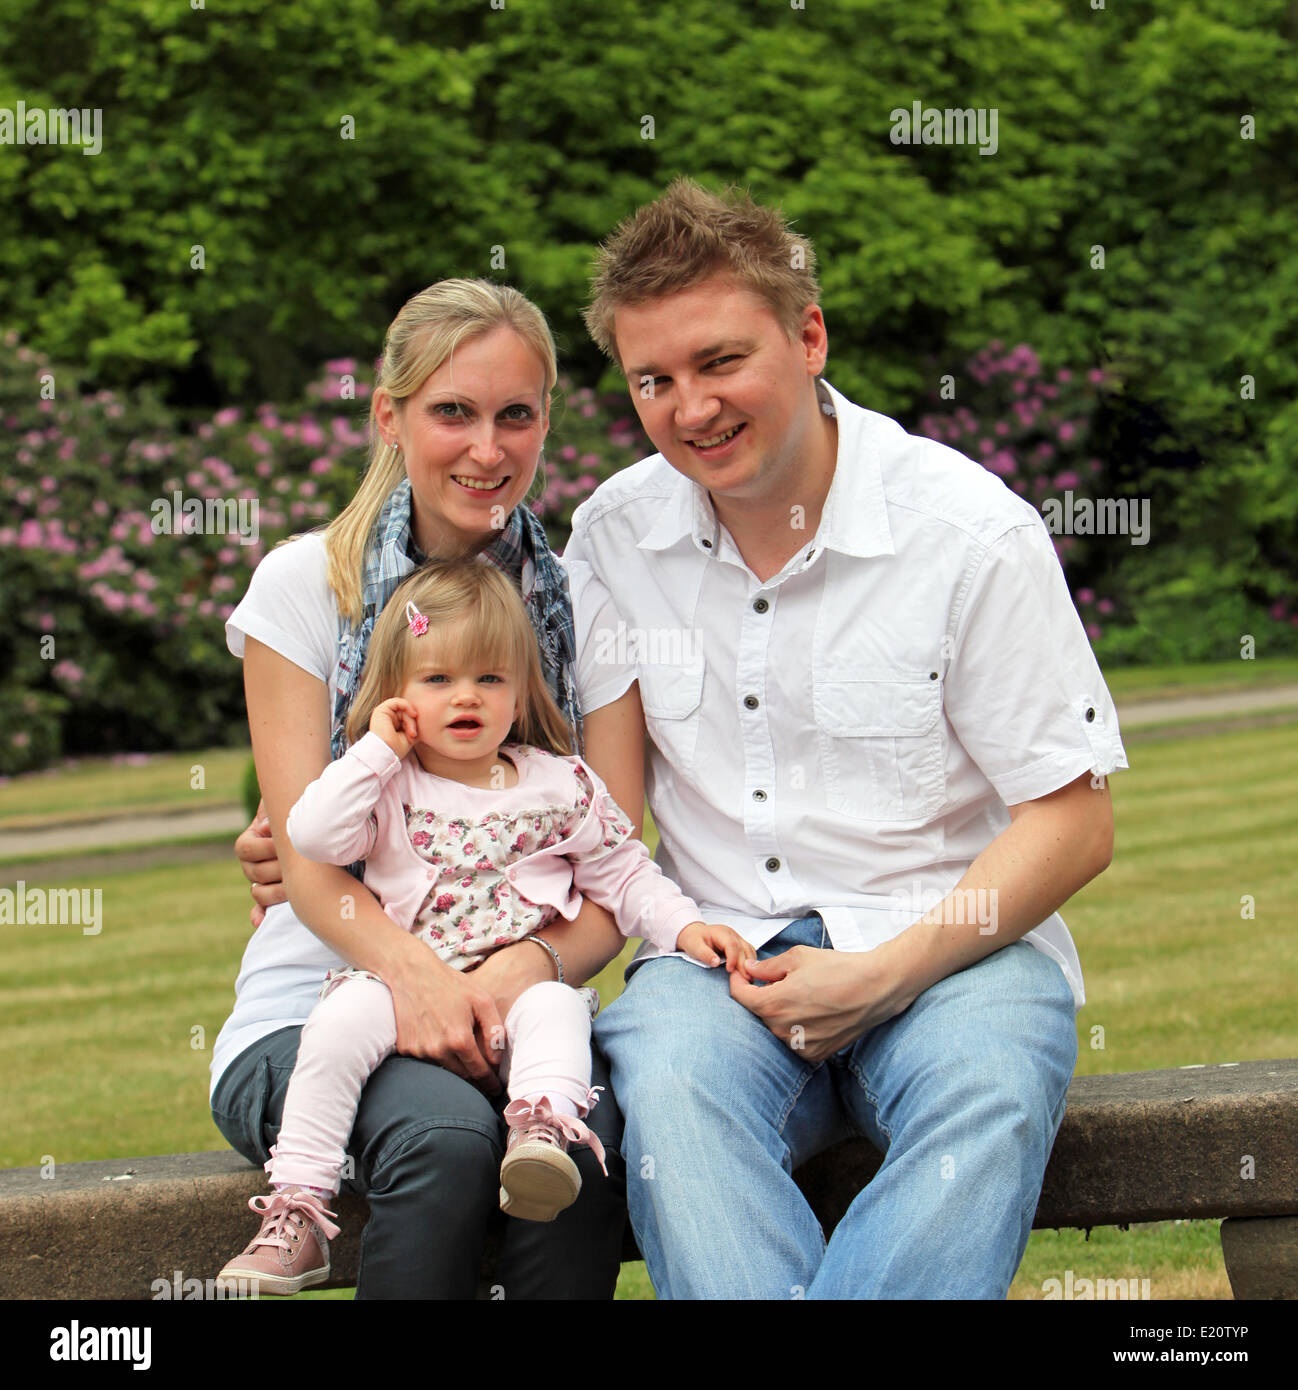 A young family with a child in the park Stock Photo